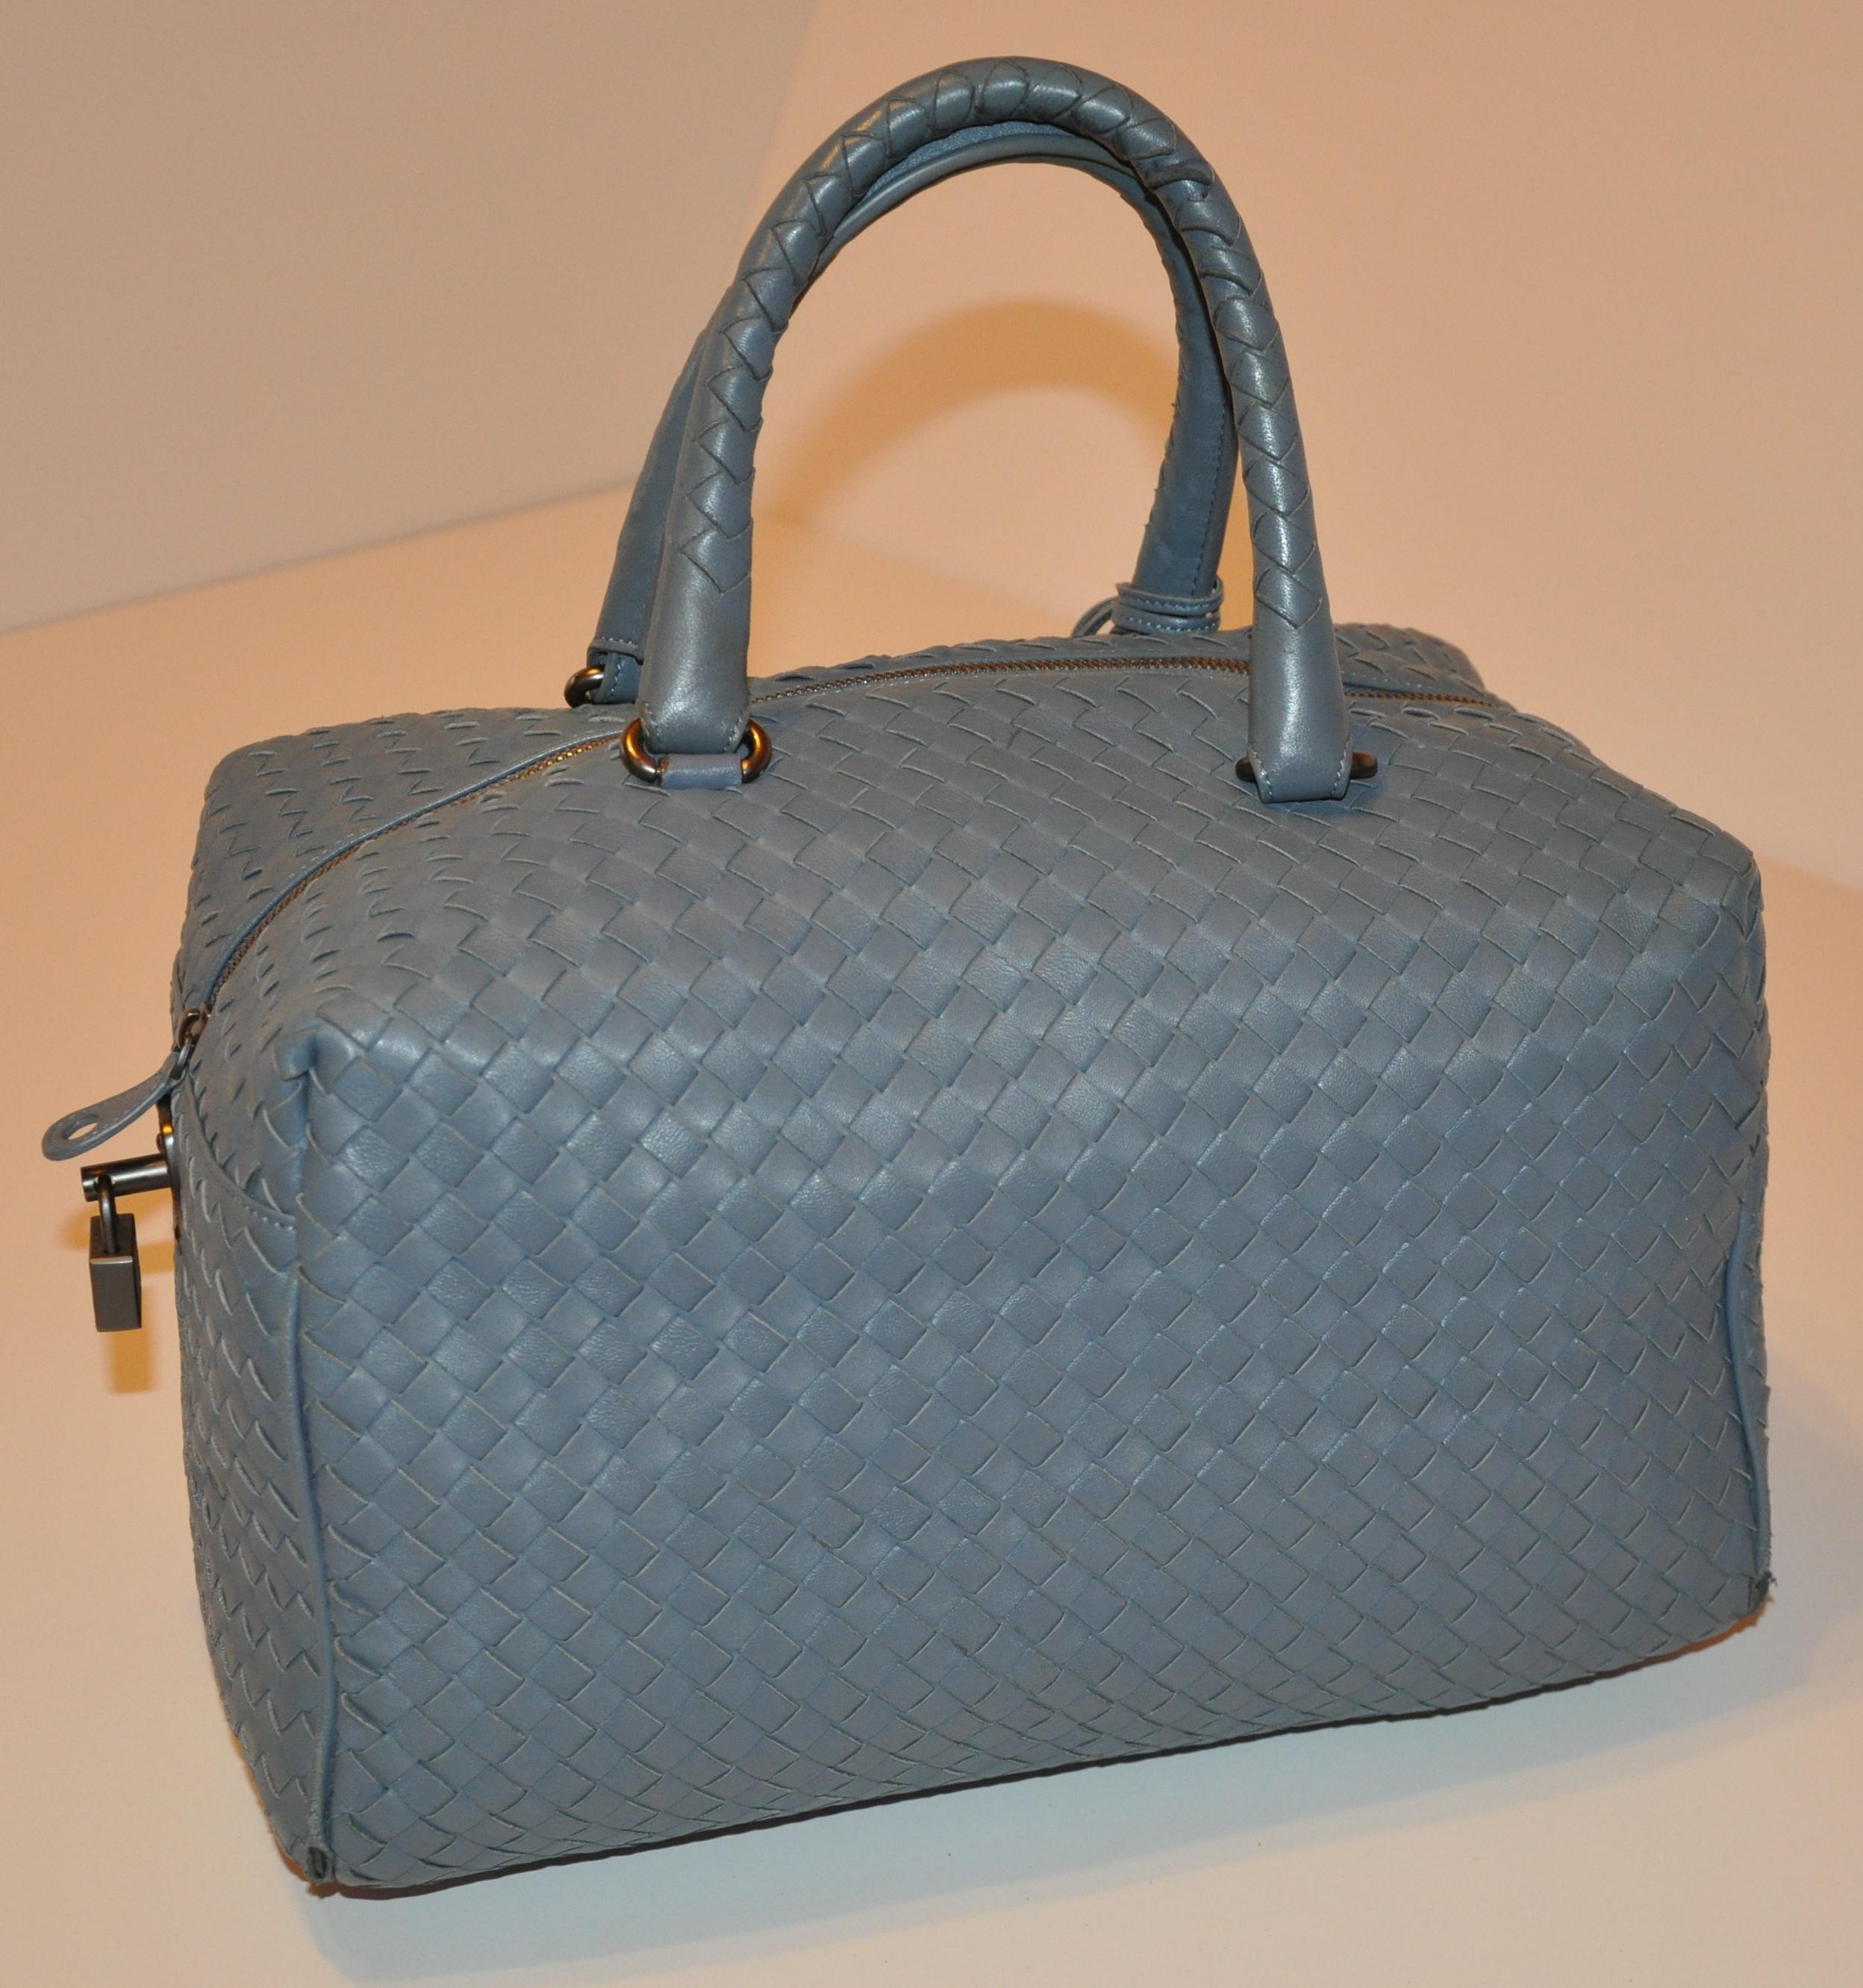        Bottega Veneta wonderfully soft steel-blue signature woven lambskin weekend tote is detailed with a zippered top which measures 16 inches. The double woven handles is accented with steel hardware and stands at 6 1/2 inches in height. The